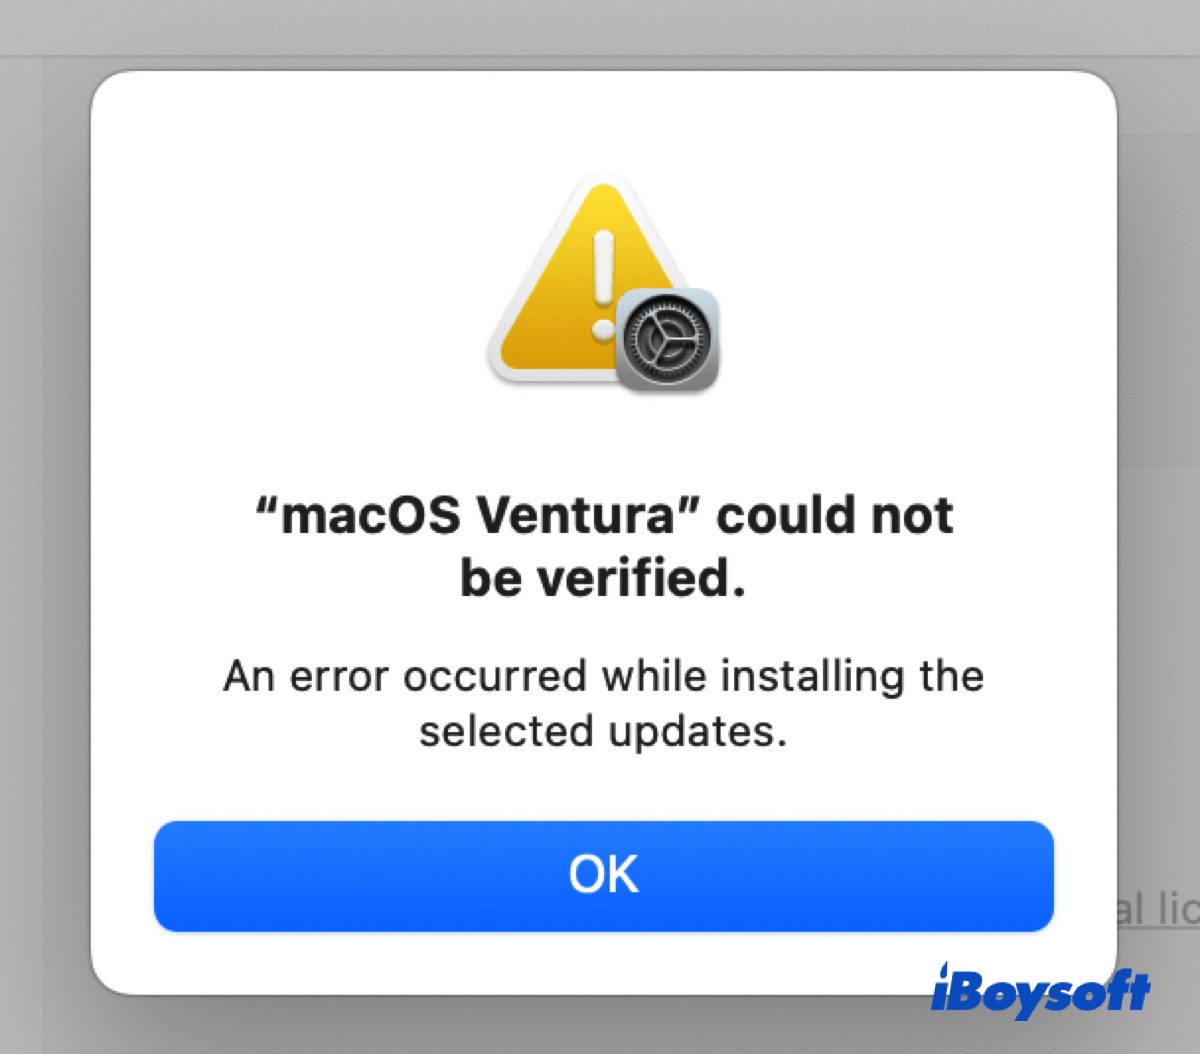 The error saying macOS Ventura could not be verified